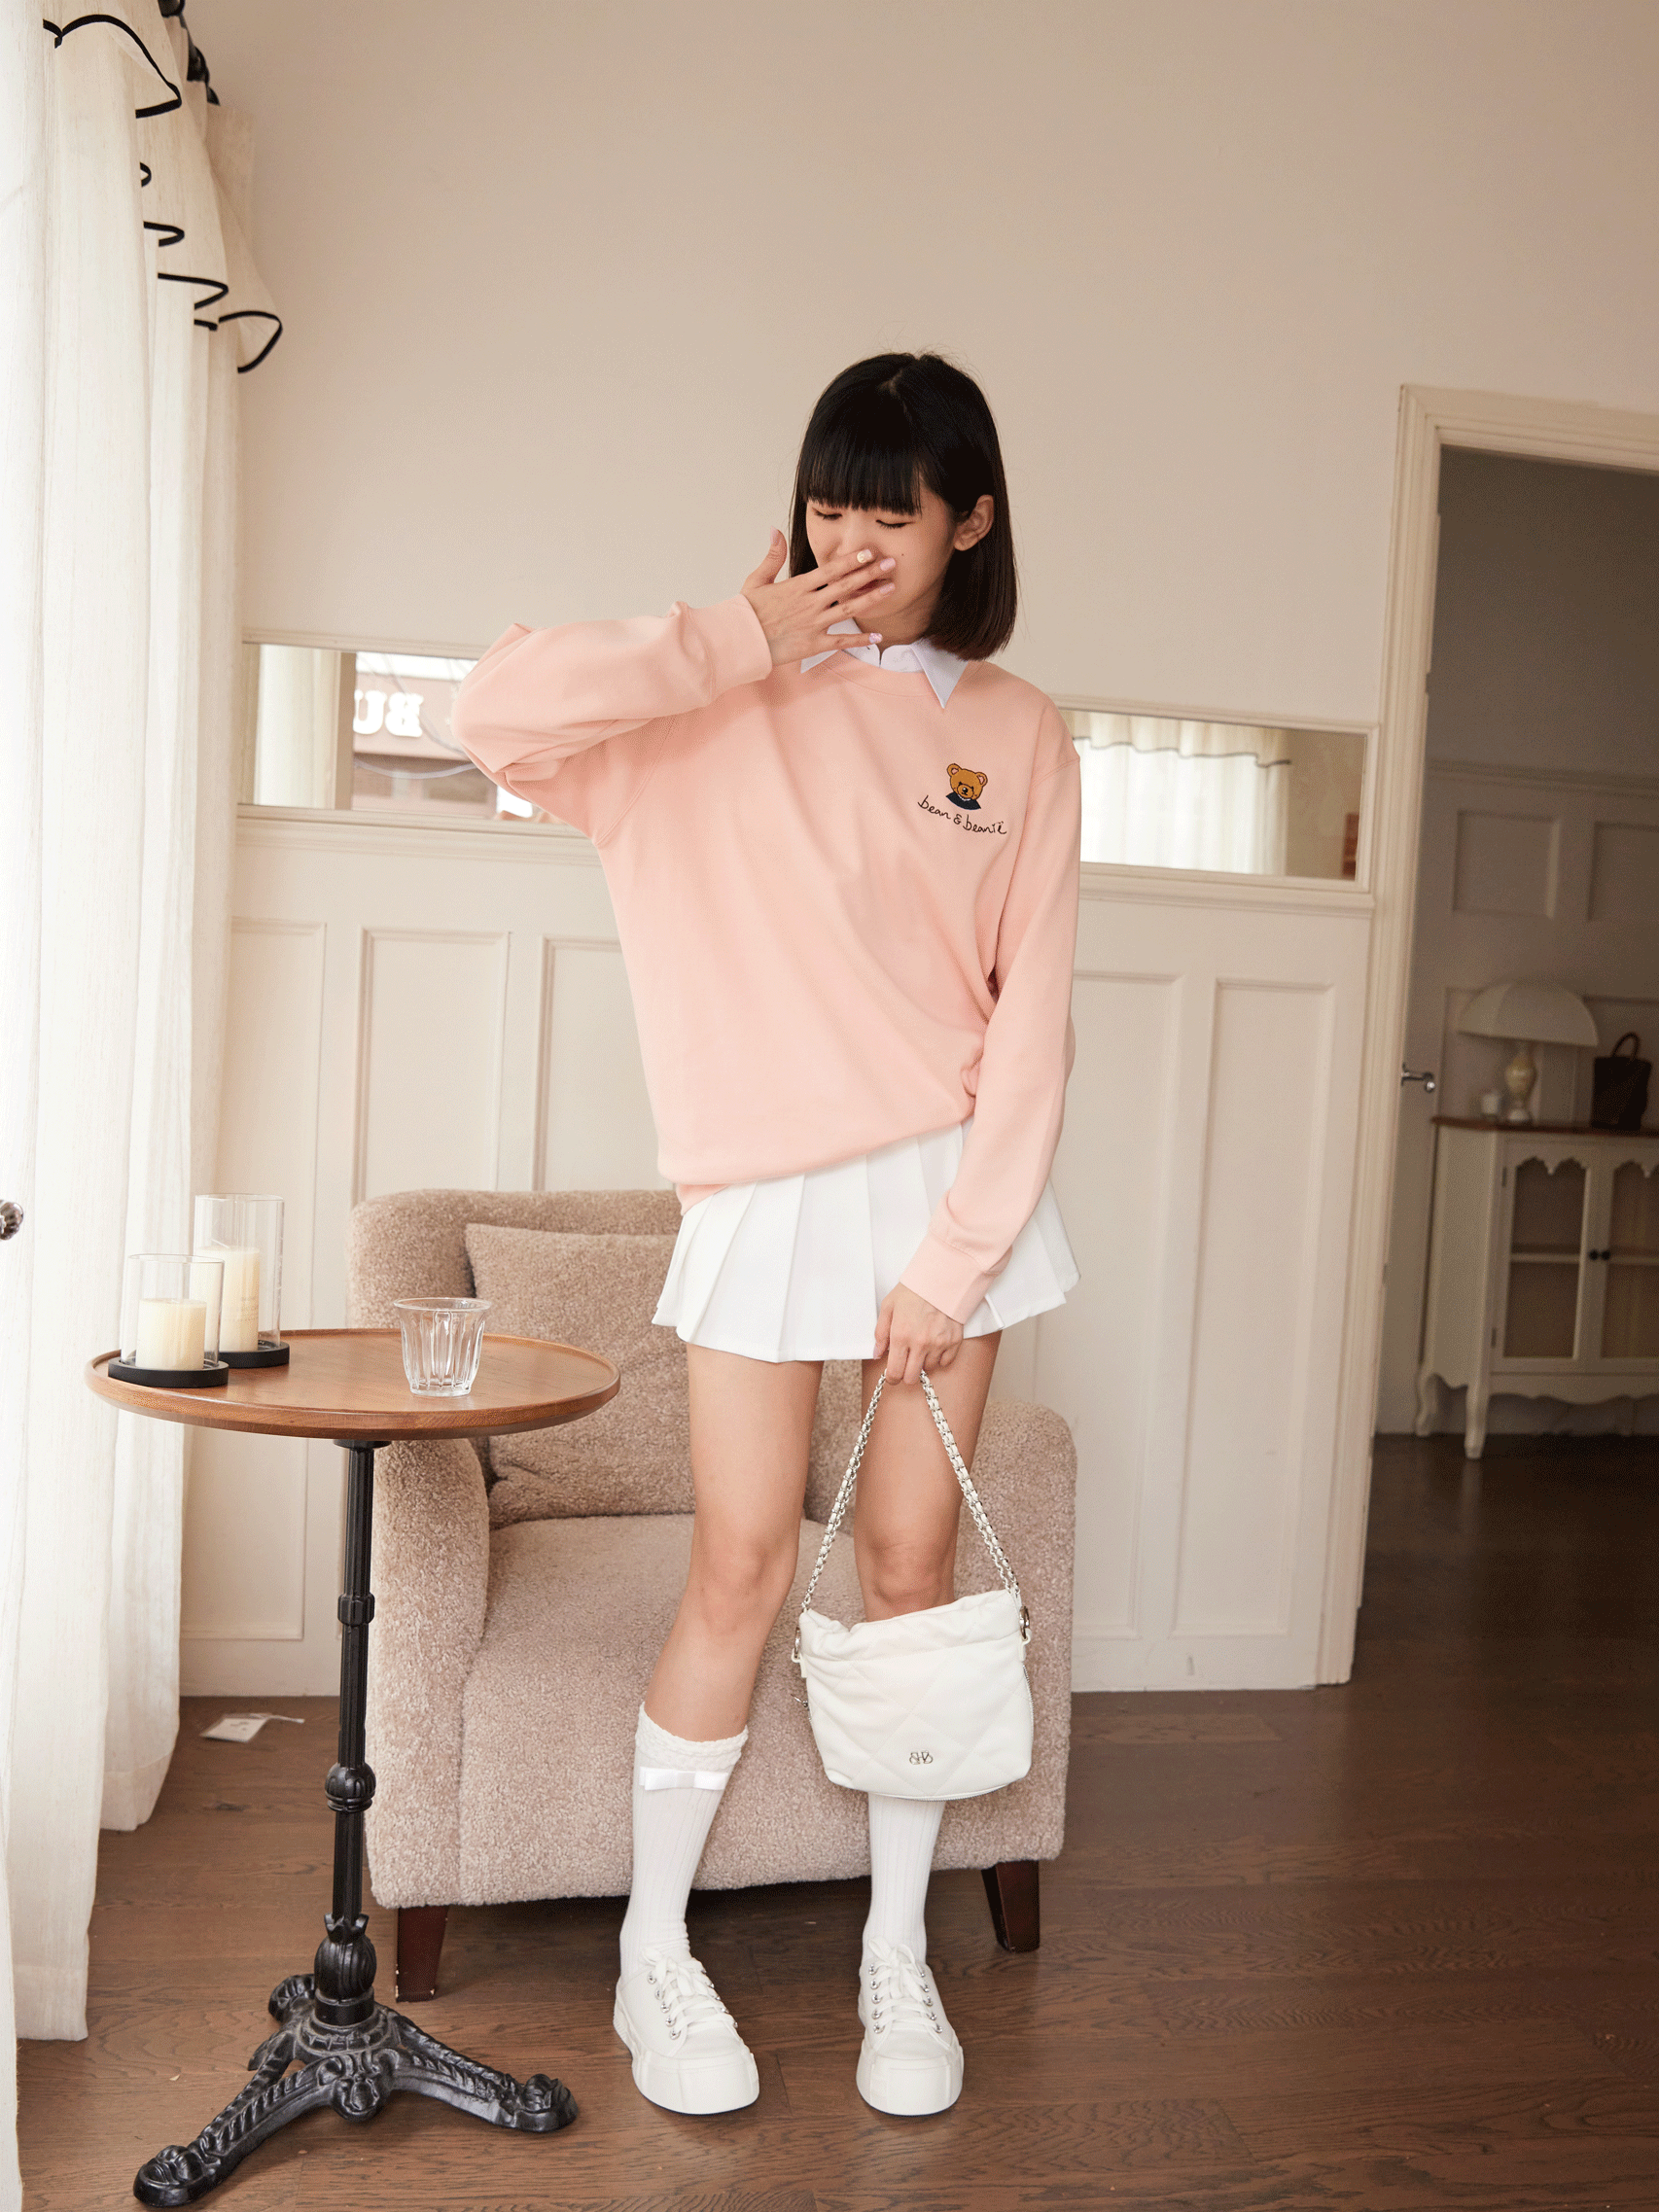 Bean and Beanië Sweatshirt Collection PINK